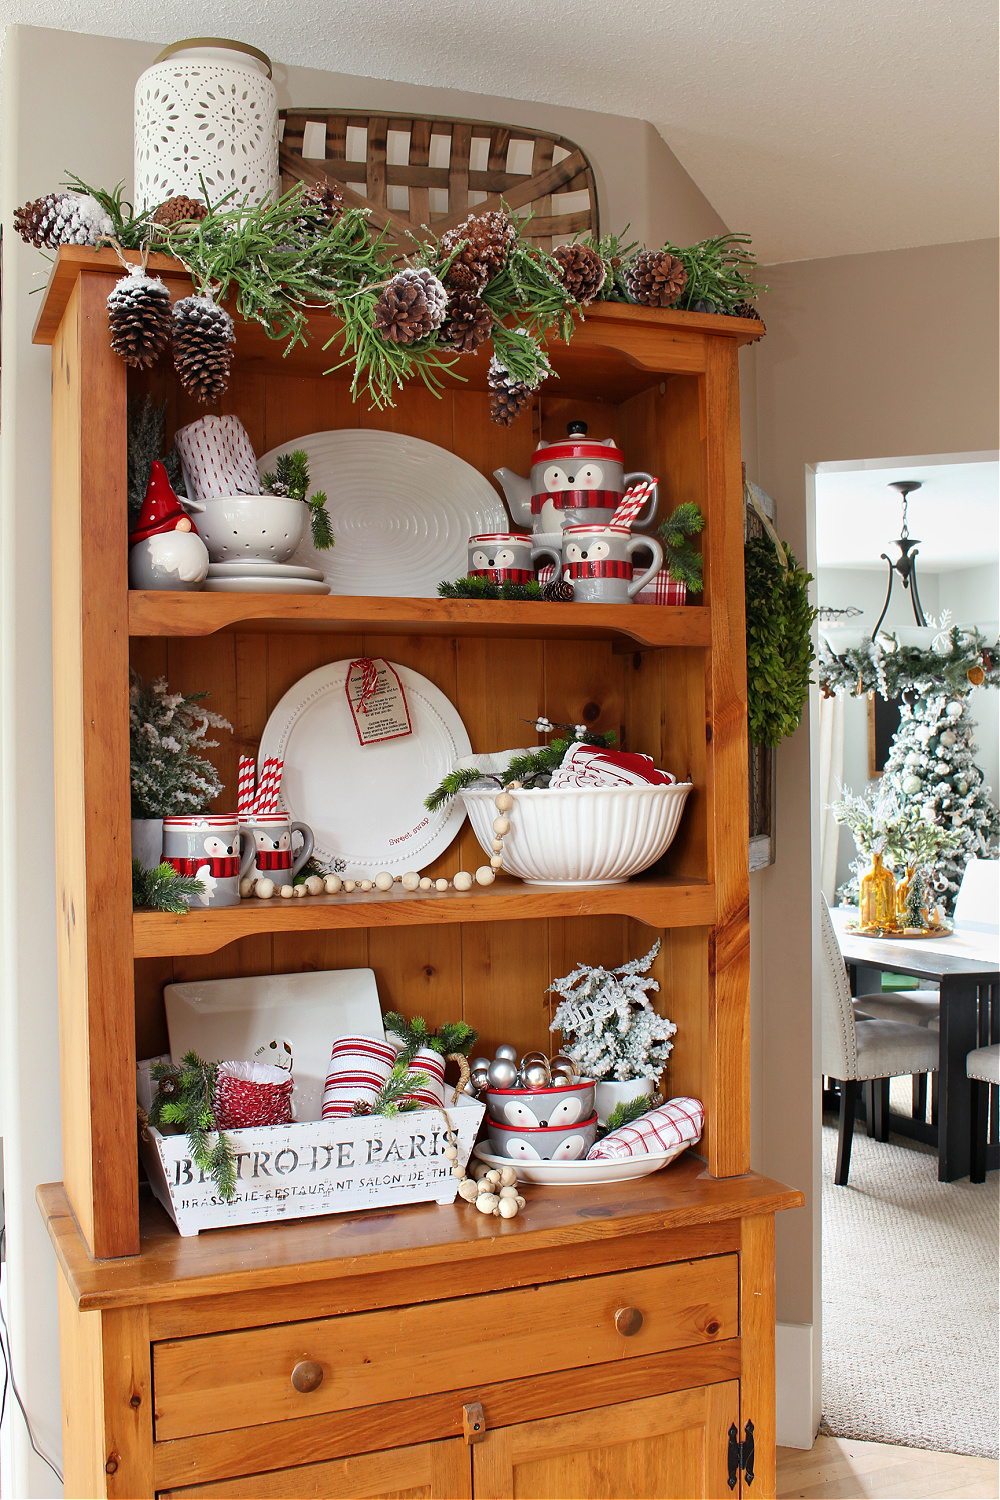 Christmas hutch decorated with a raccoon teapot and mug set.